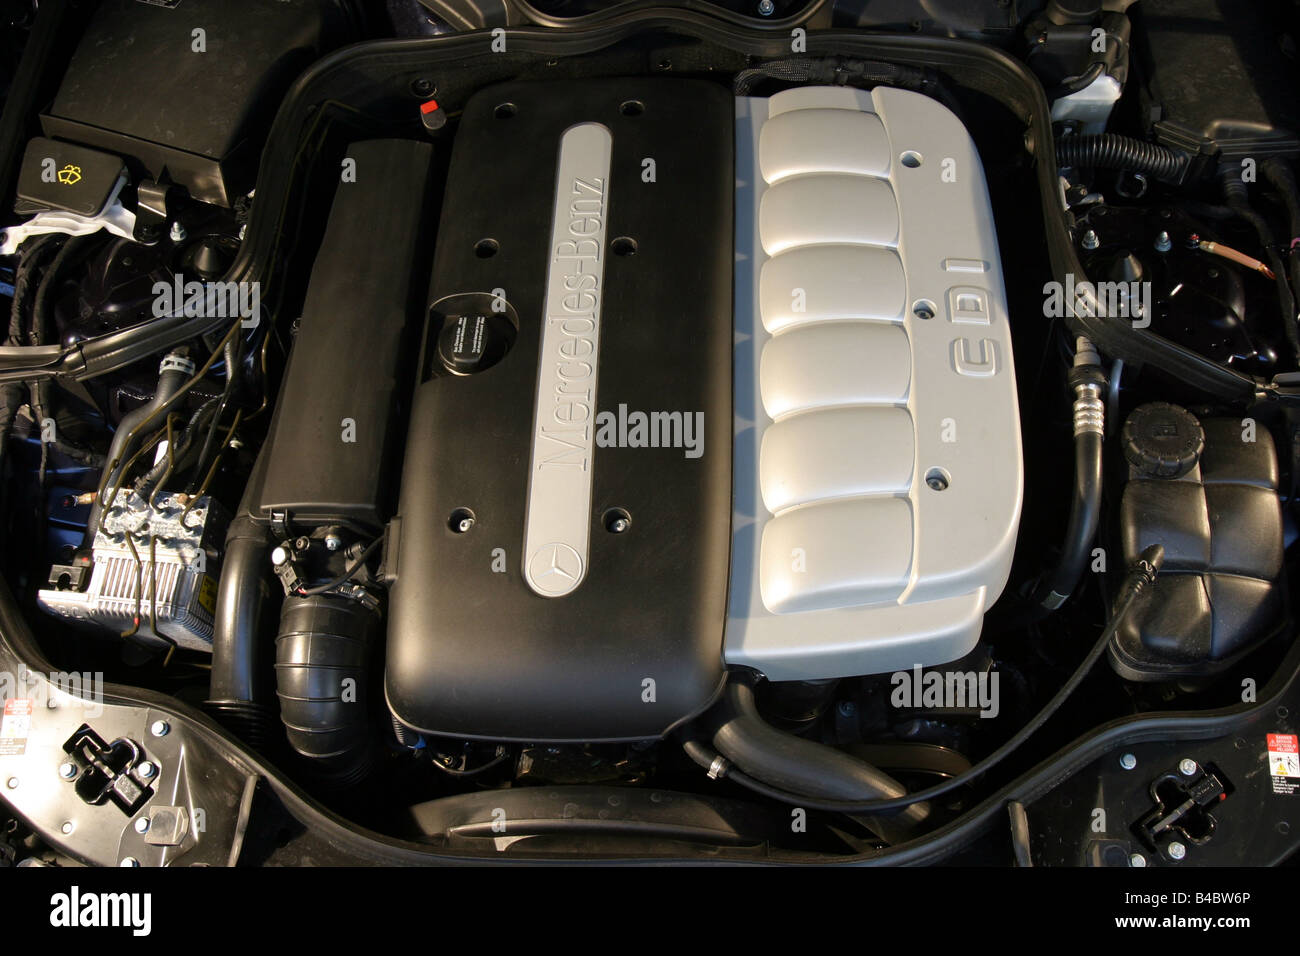 Car, Mercedes E 320 CDI Elegance automatic, upper middle-sized , Limousine,  model year 2002-, black, view in engine compartment Stock Photo - Alamy